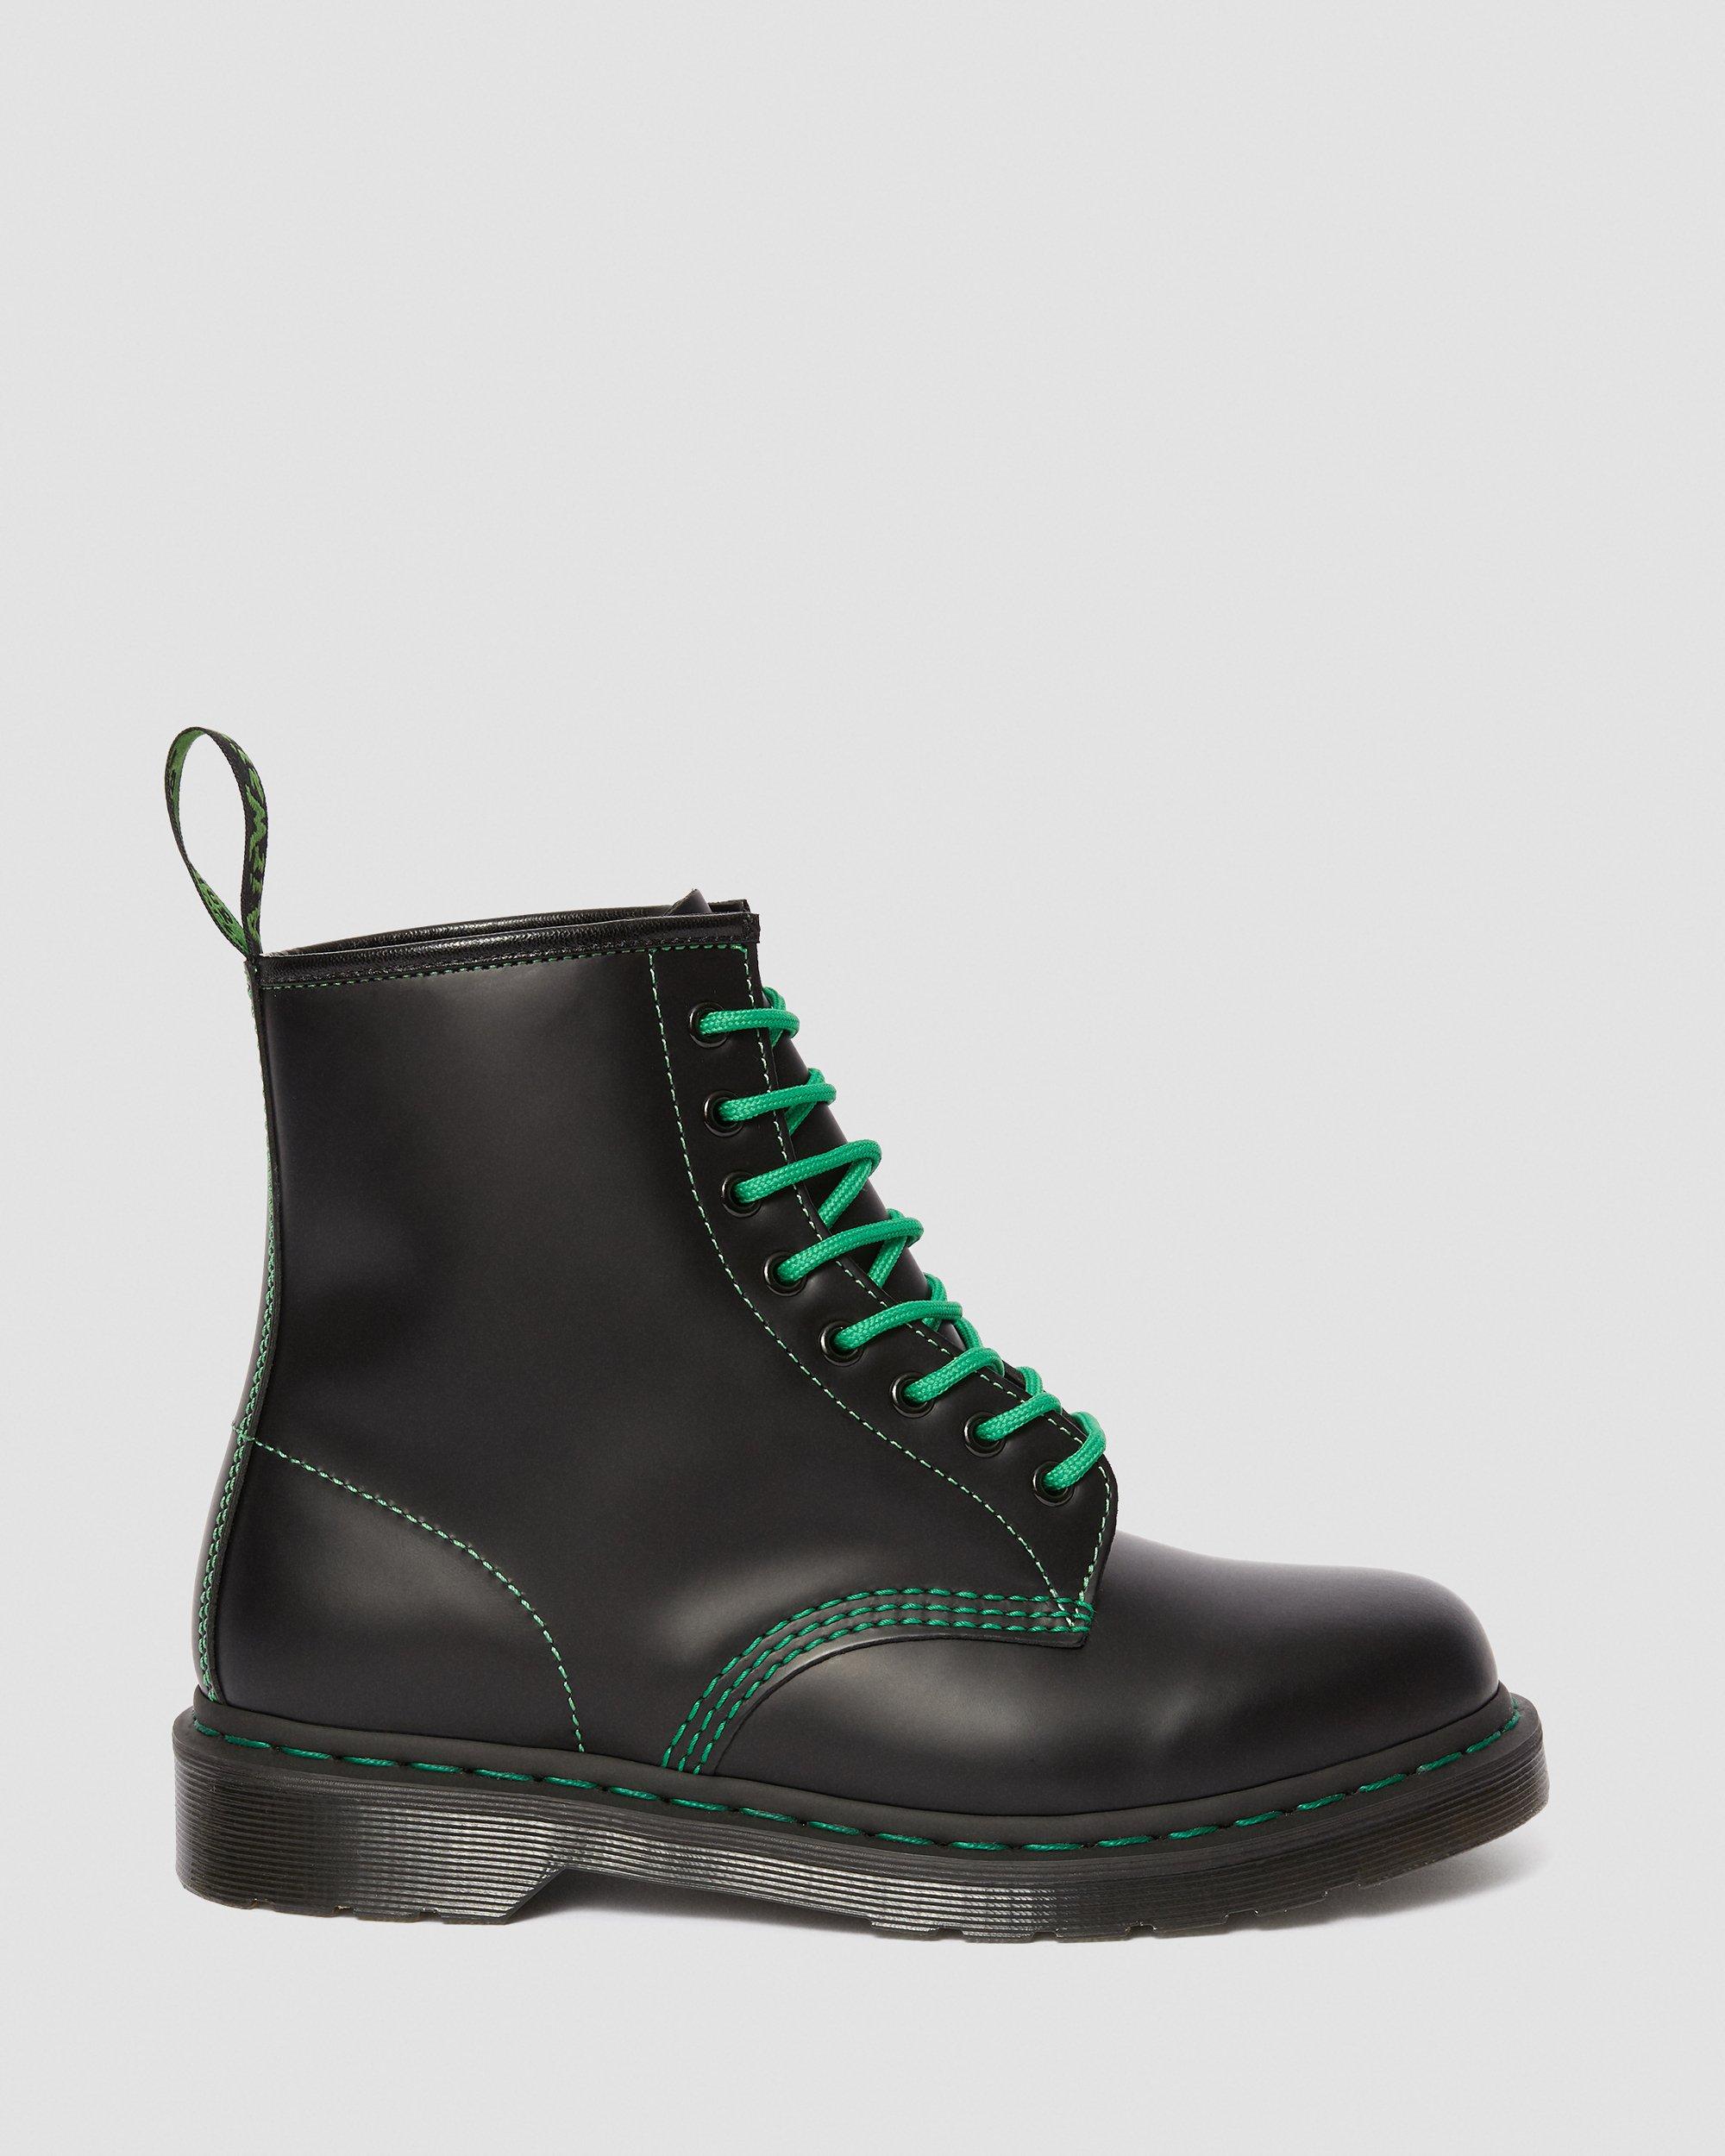 1460 Contrast Stitch Smooth Leather | Dr. Martens